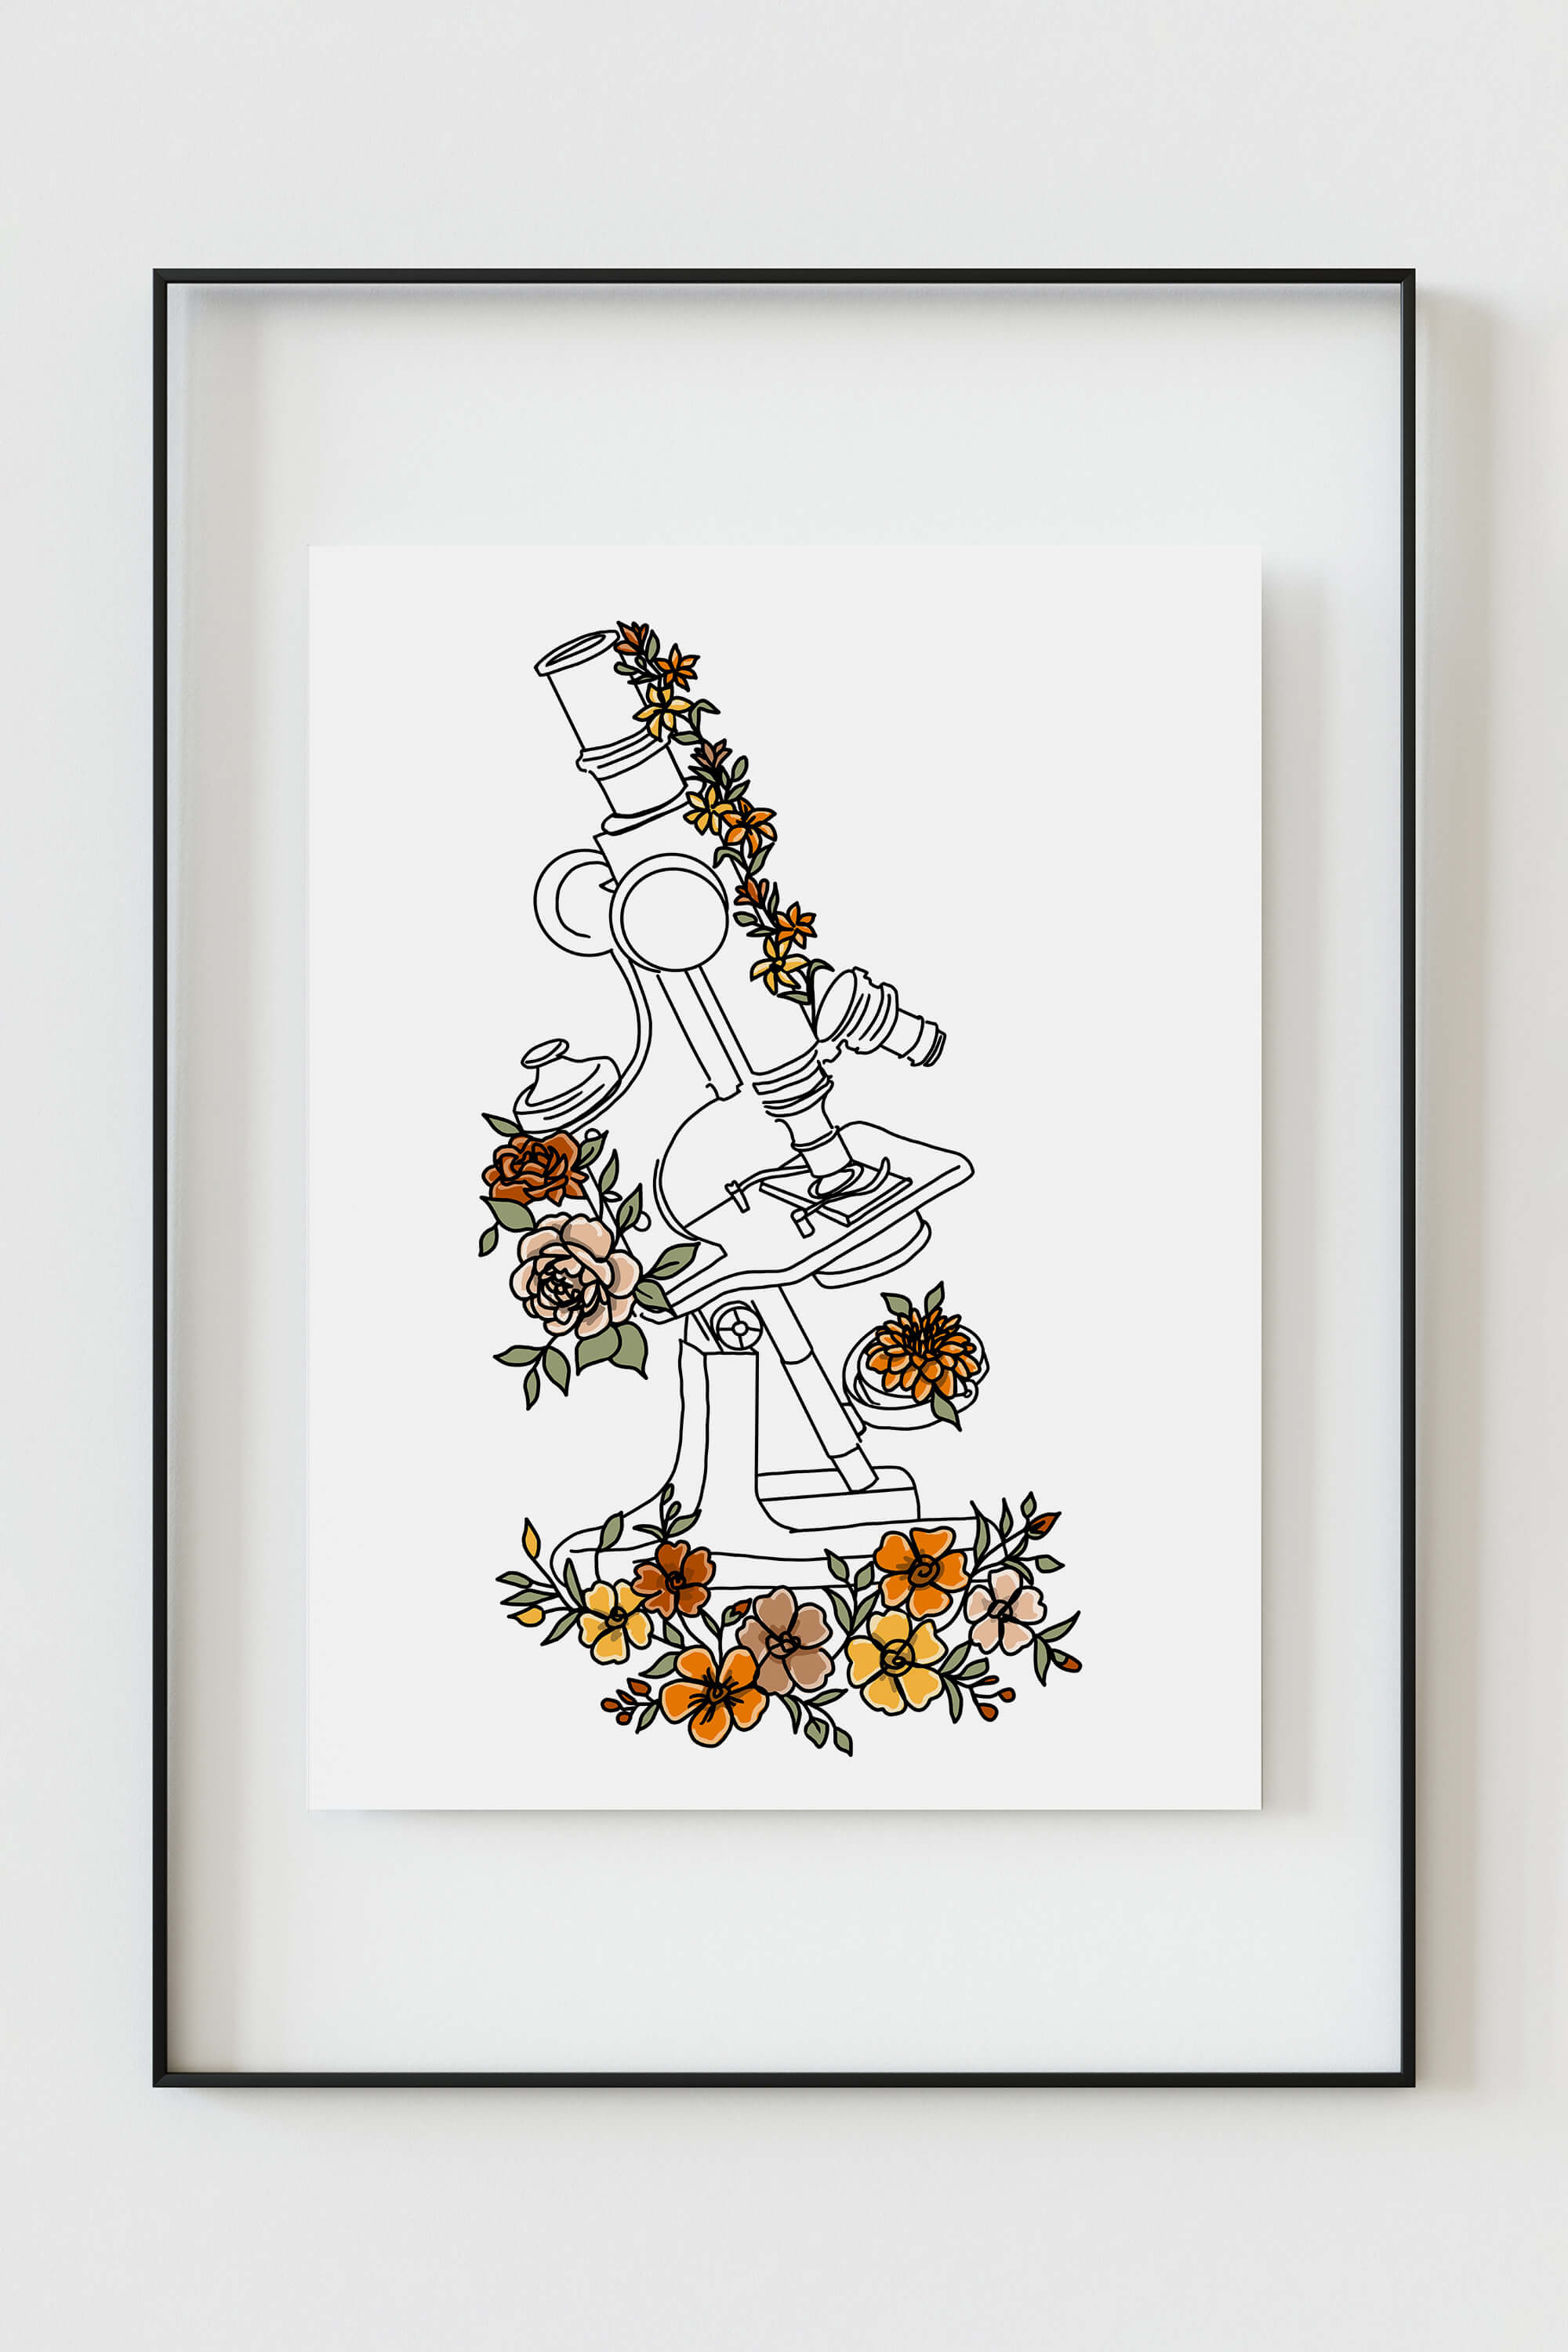 Vibrant Microscope Wall Art blending botanical beauty with educational themes, suitable for science classroom decoration.